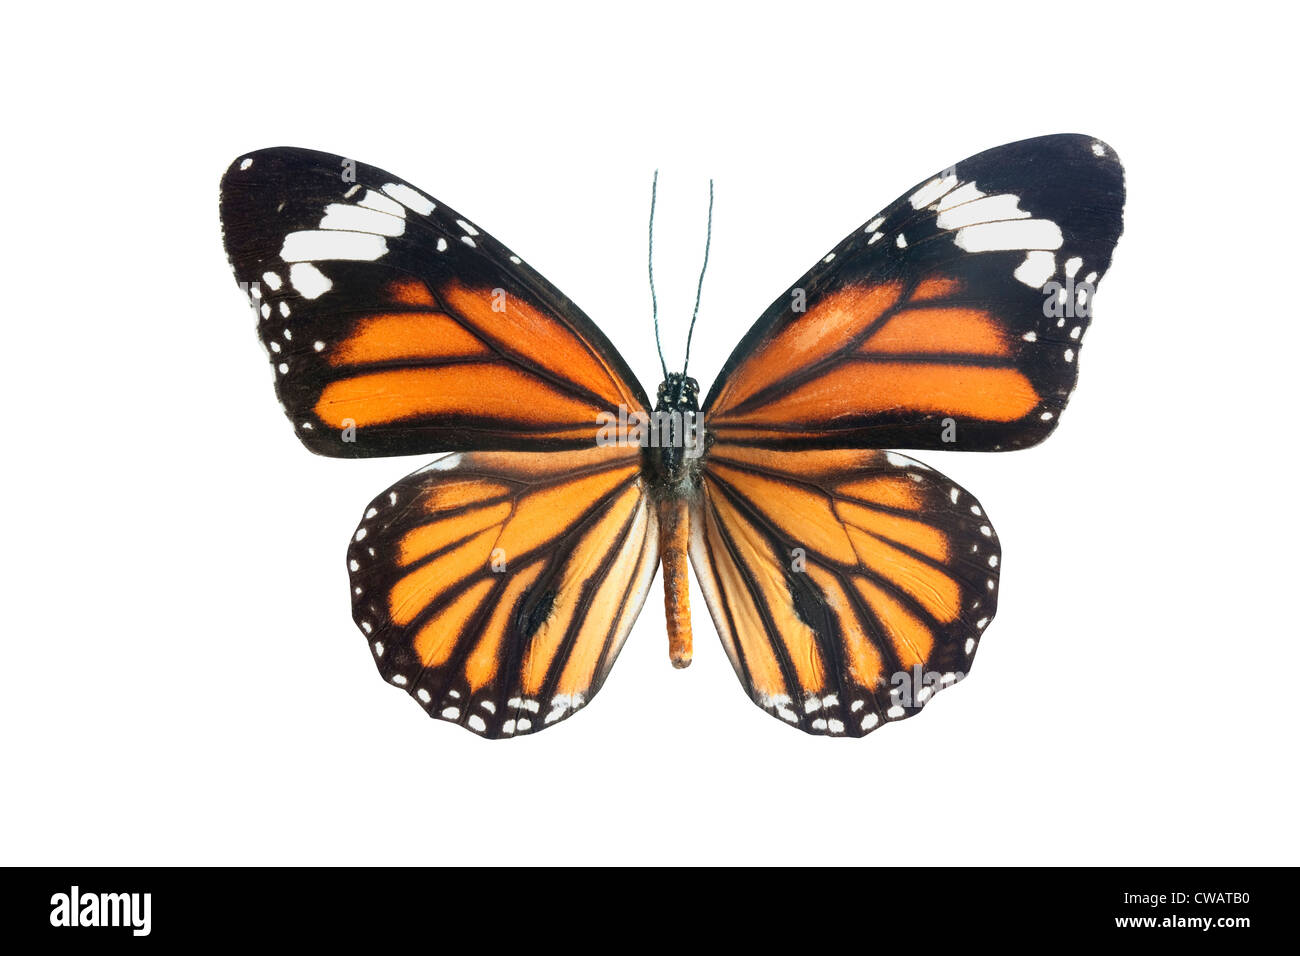 orange black and red butterfly isolated on a white background Stock Photo